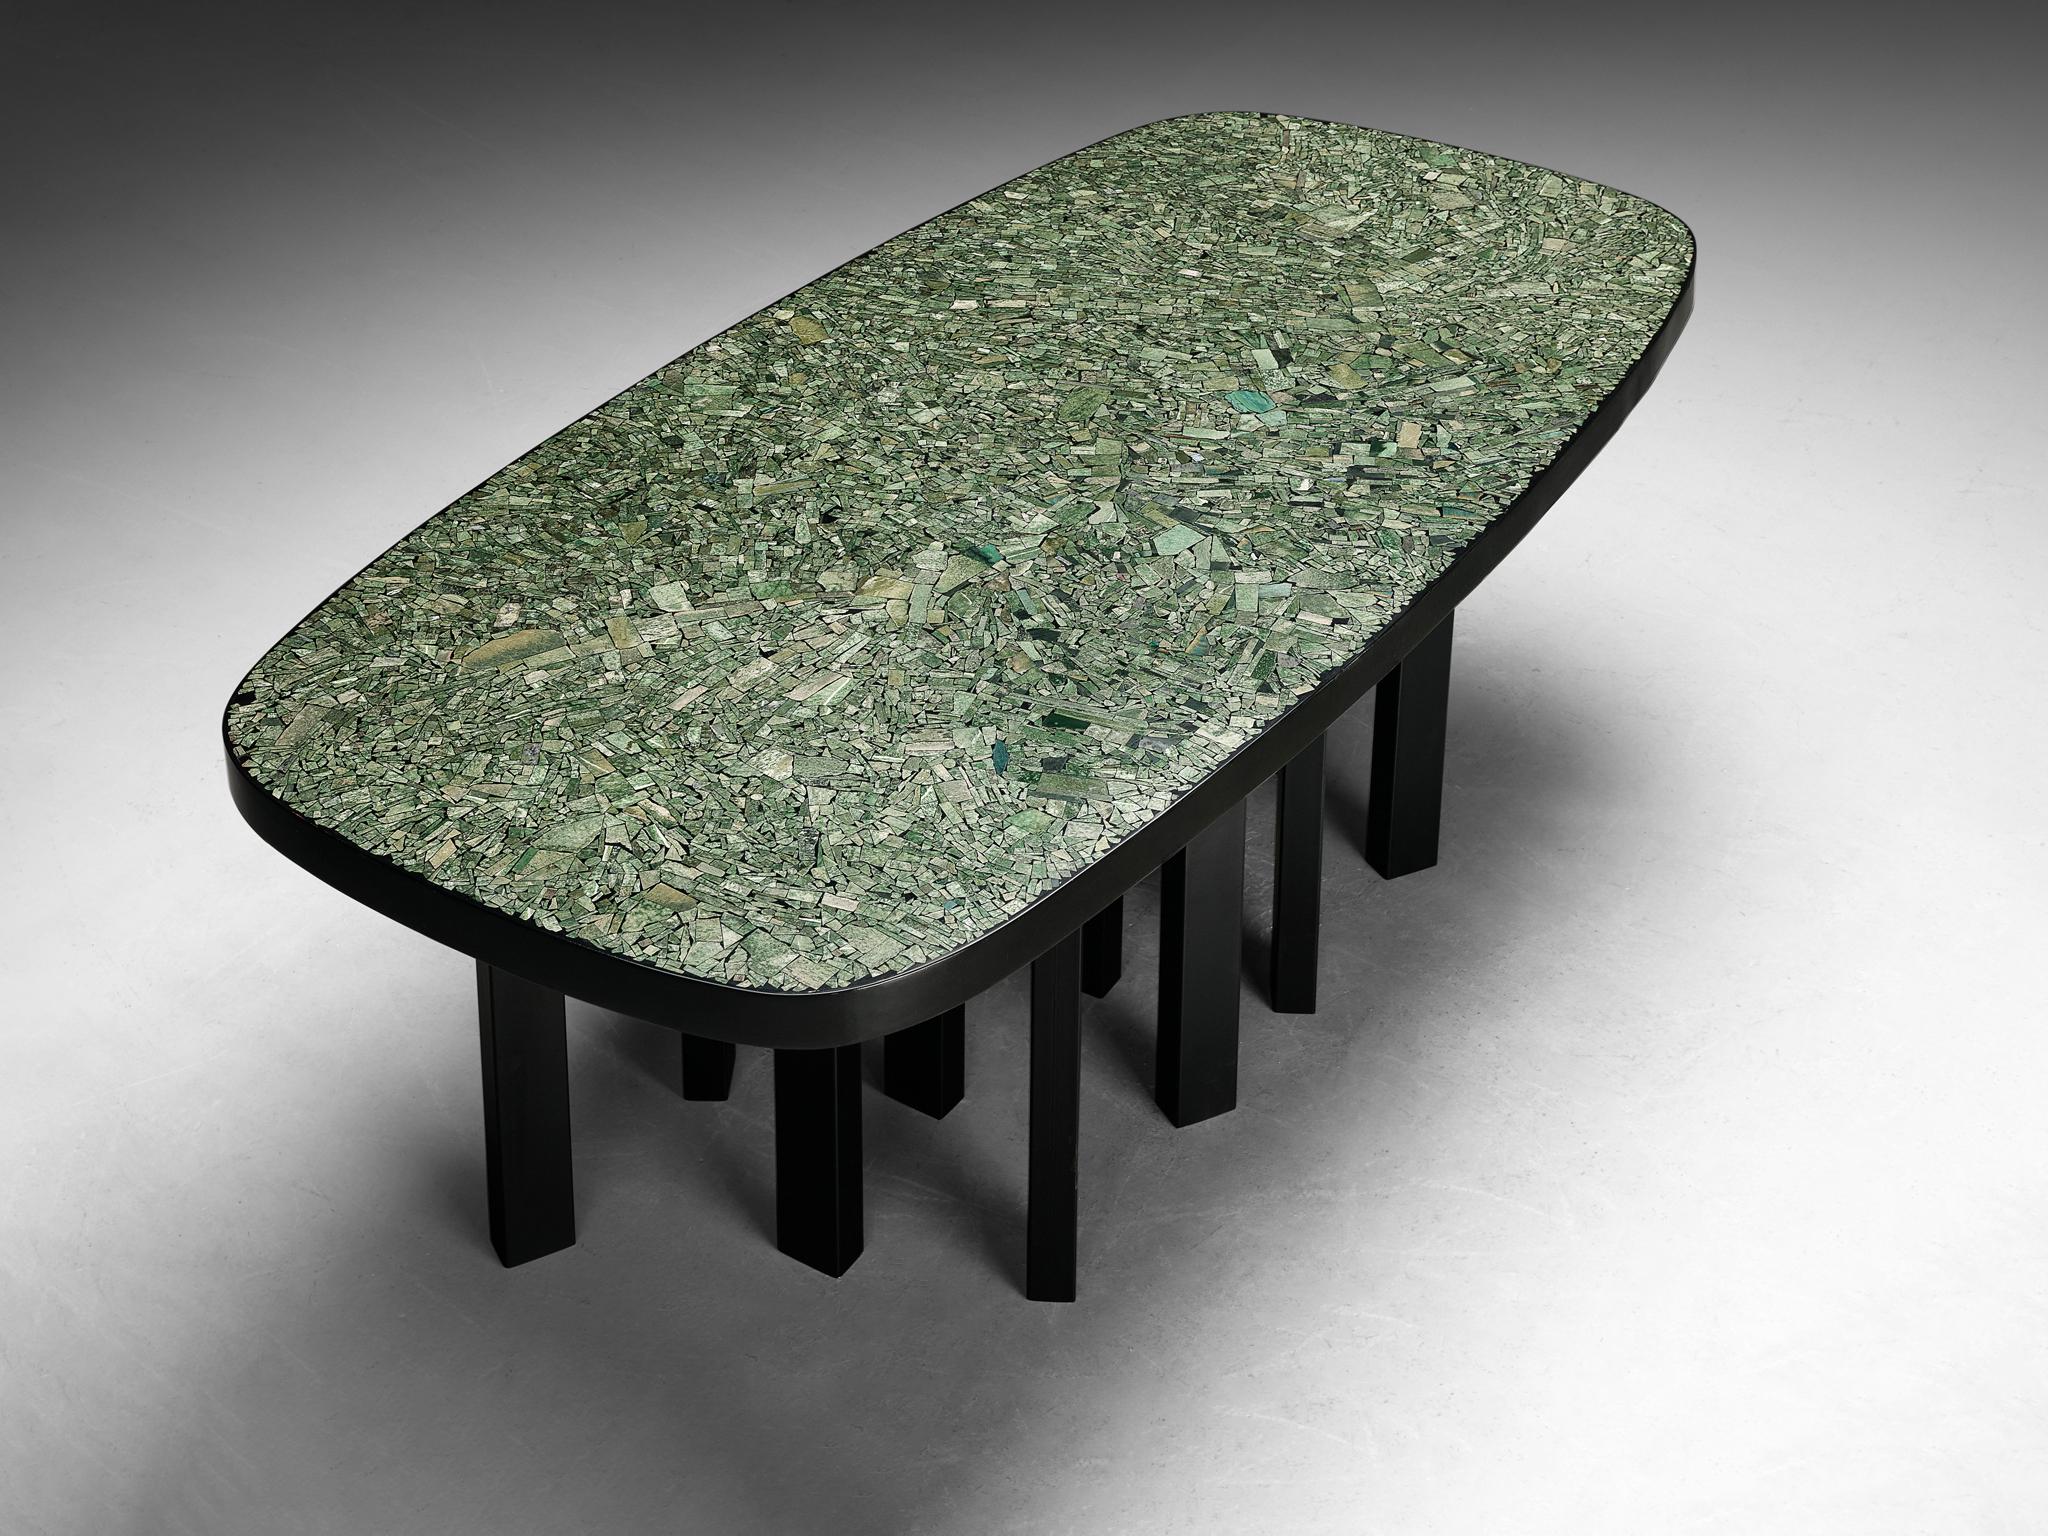 Ado Chale, dining table, jade Wyoming (nephrite jade), resin, lacquered steel, Belgium, 1970

Crafted in 1970 by the autodidact Belgian artist Ado Chale, this monumental table stands as a testament to his use of precious materials and impeccable